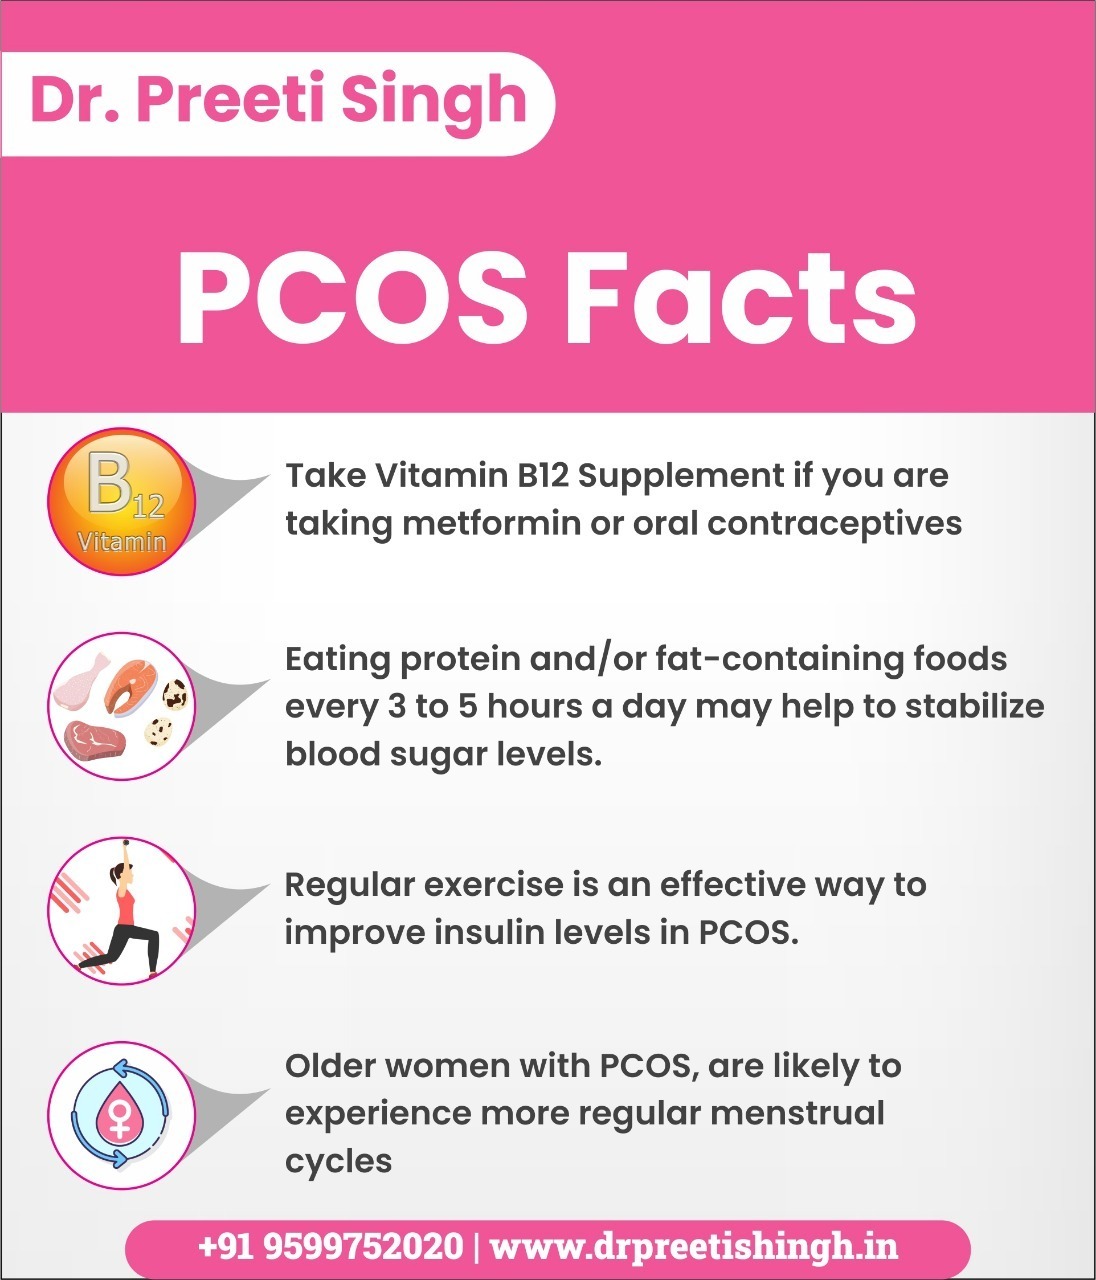 foods to eat for pcos, best exercise for pcos, pcos exercise plan, pcos diet plan